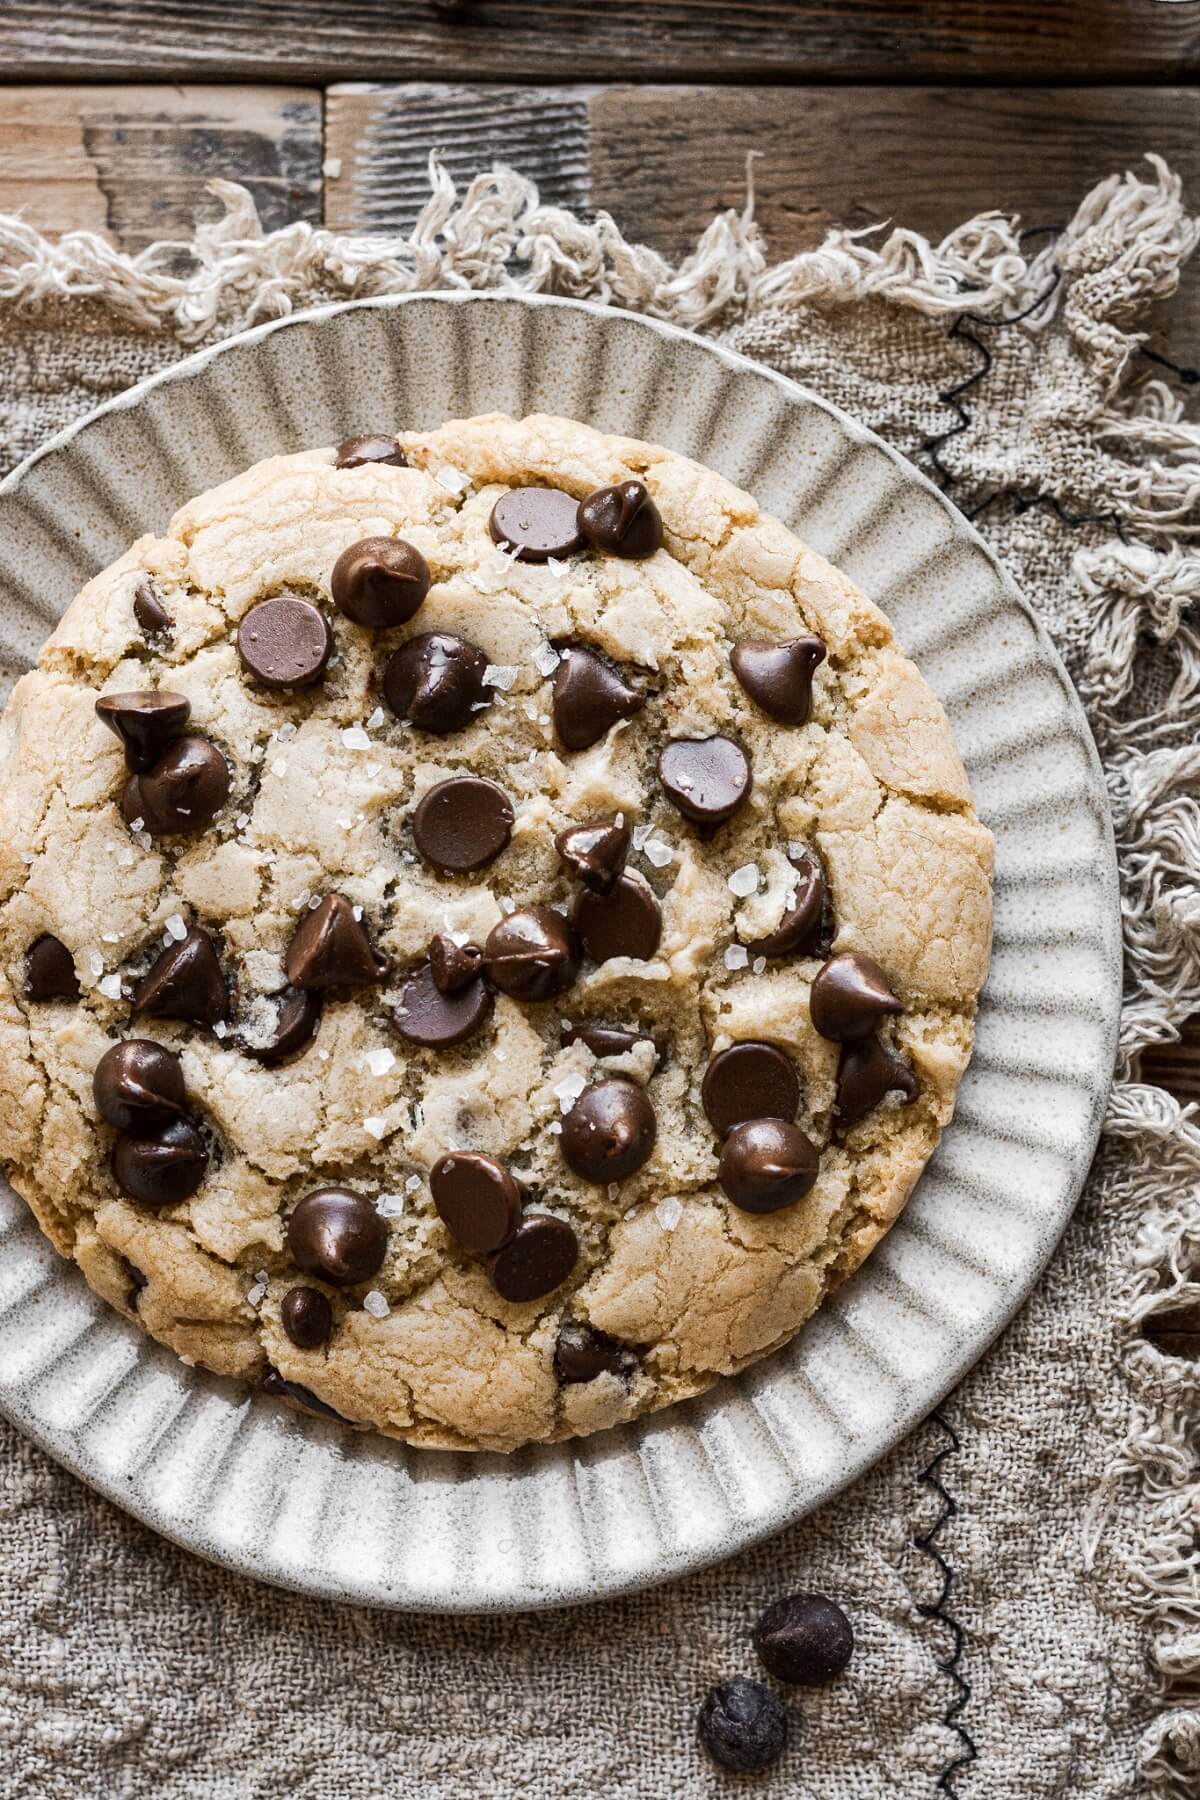 A big chocolate chip cookie on a plate.